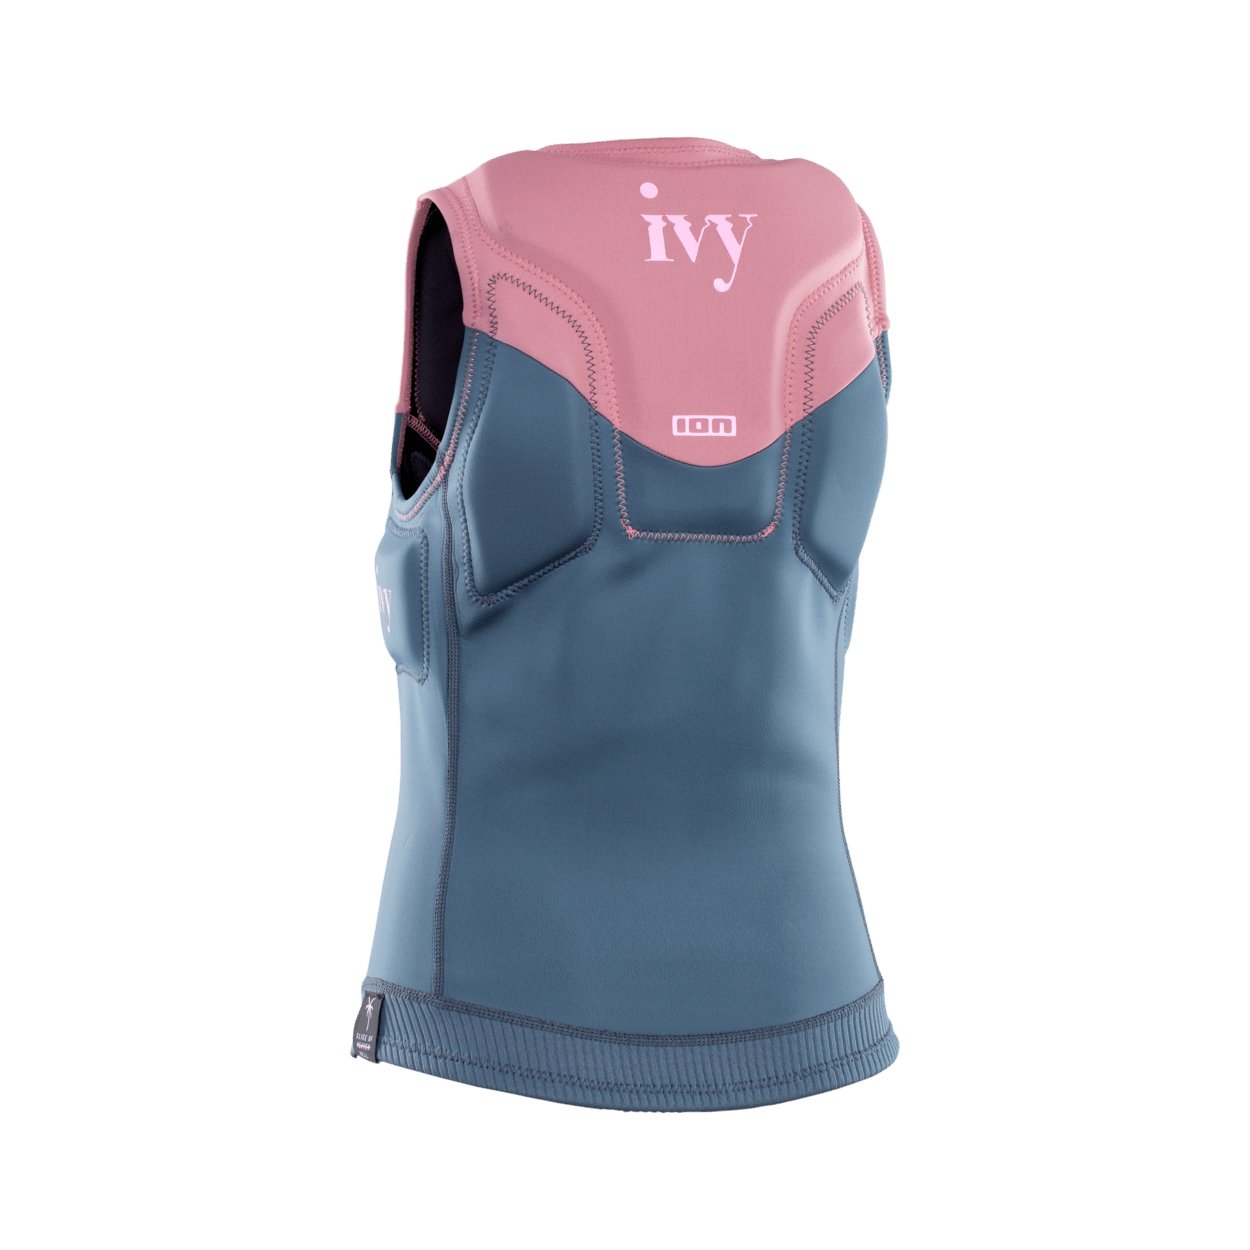 ION Ivy Vest Front Zip 2022 - Worthing Watersports - 9010583051949 - Protection - ION Water